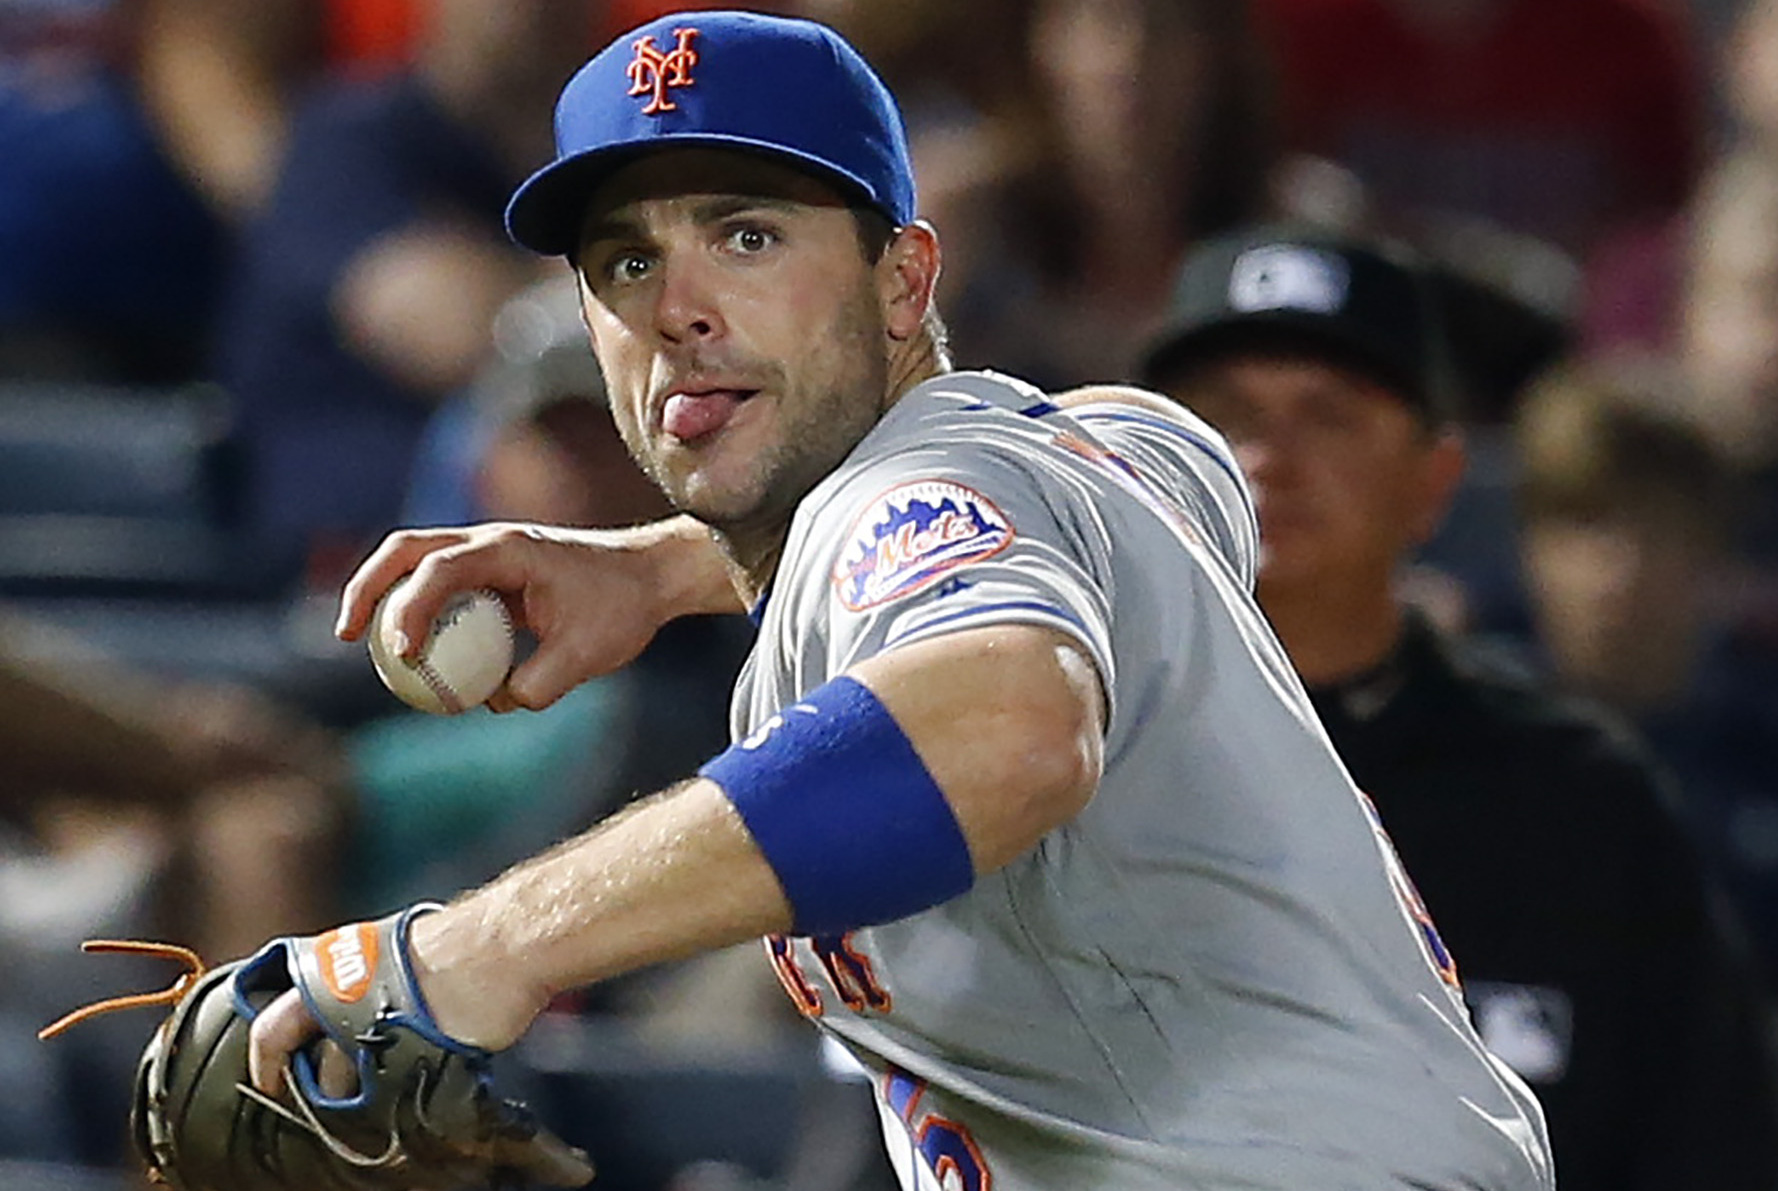 After Neck Surgery, Mets' David Wright Expects to Return 'as Good